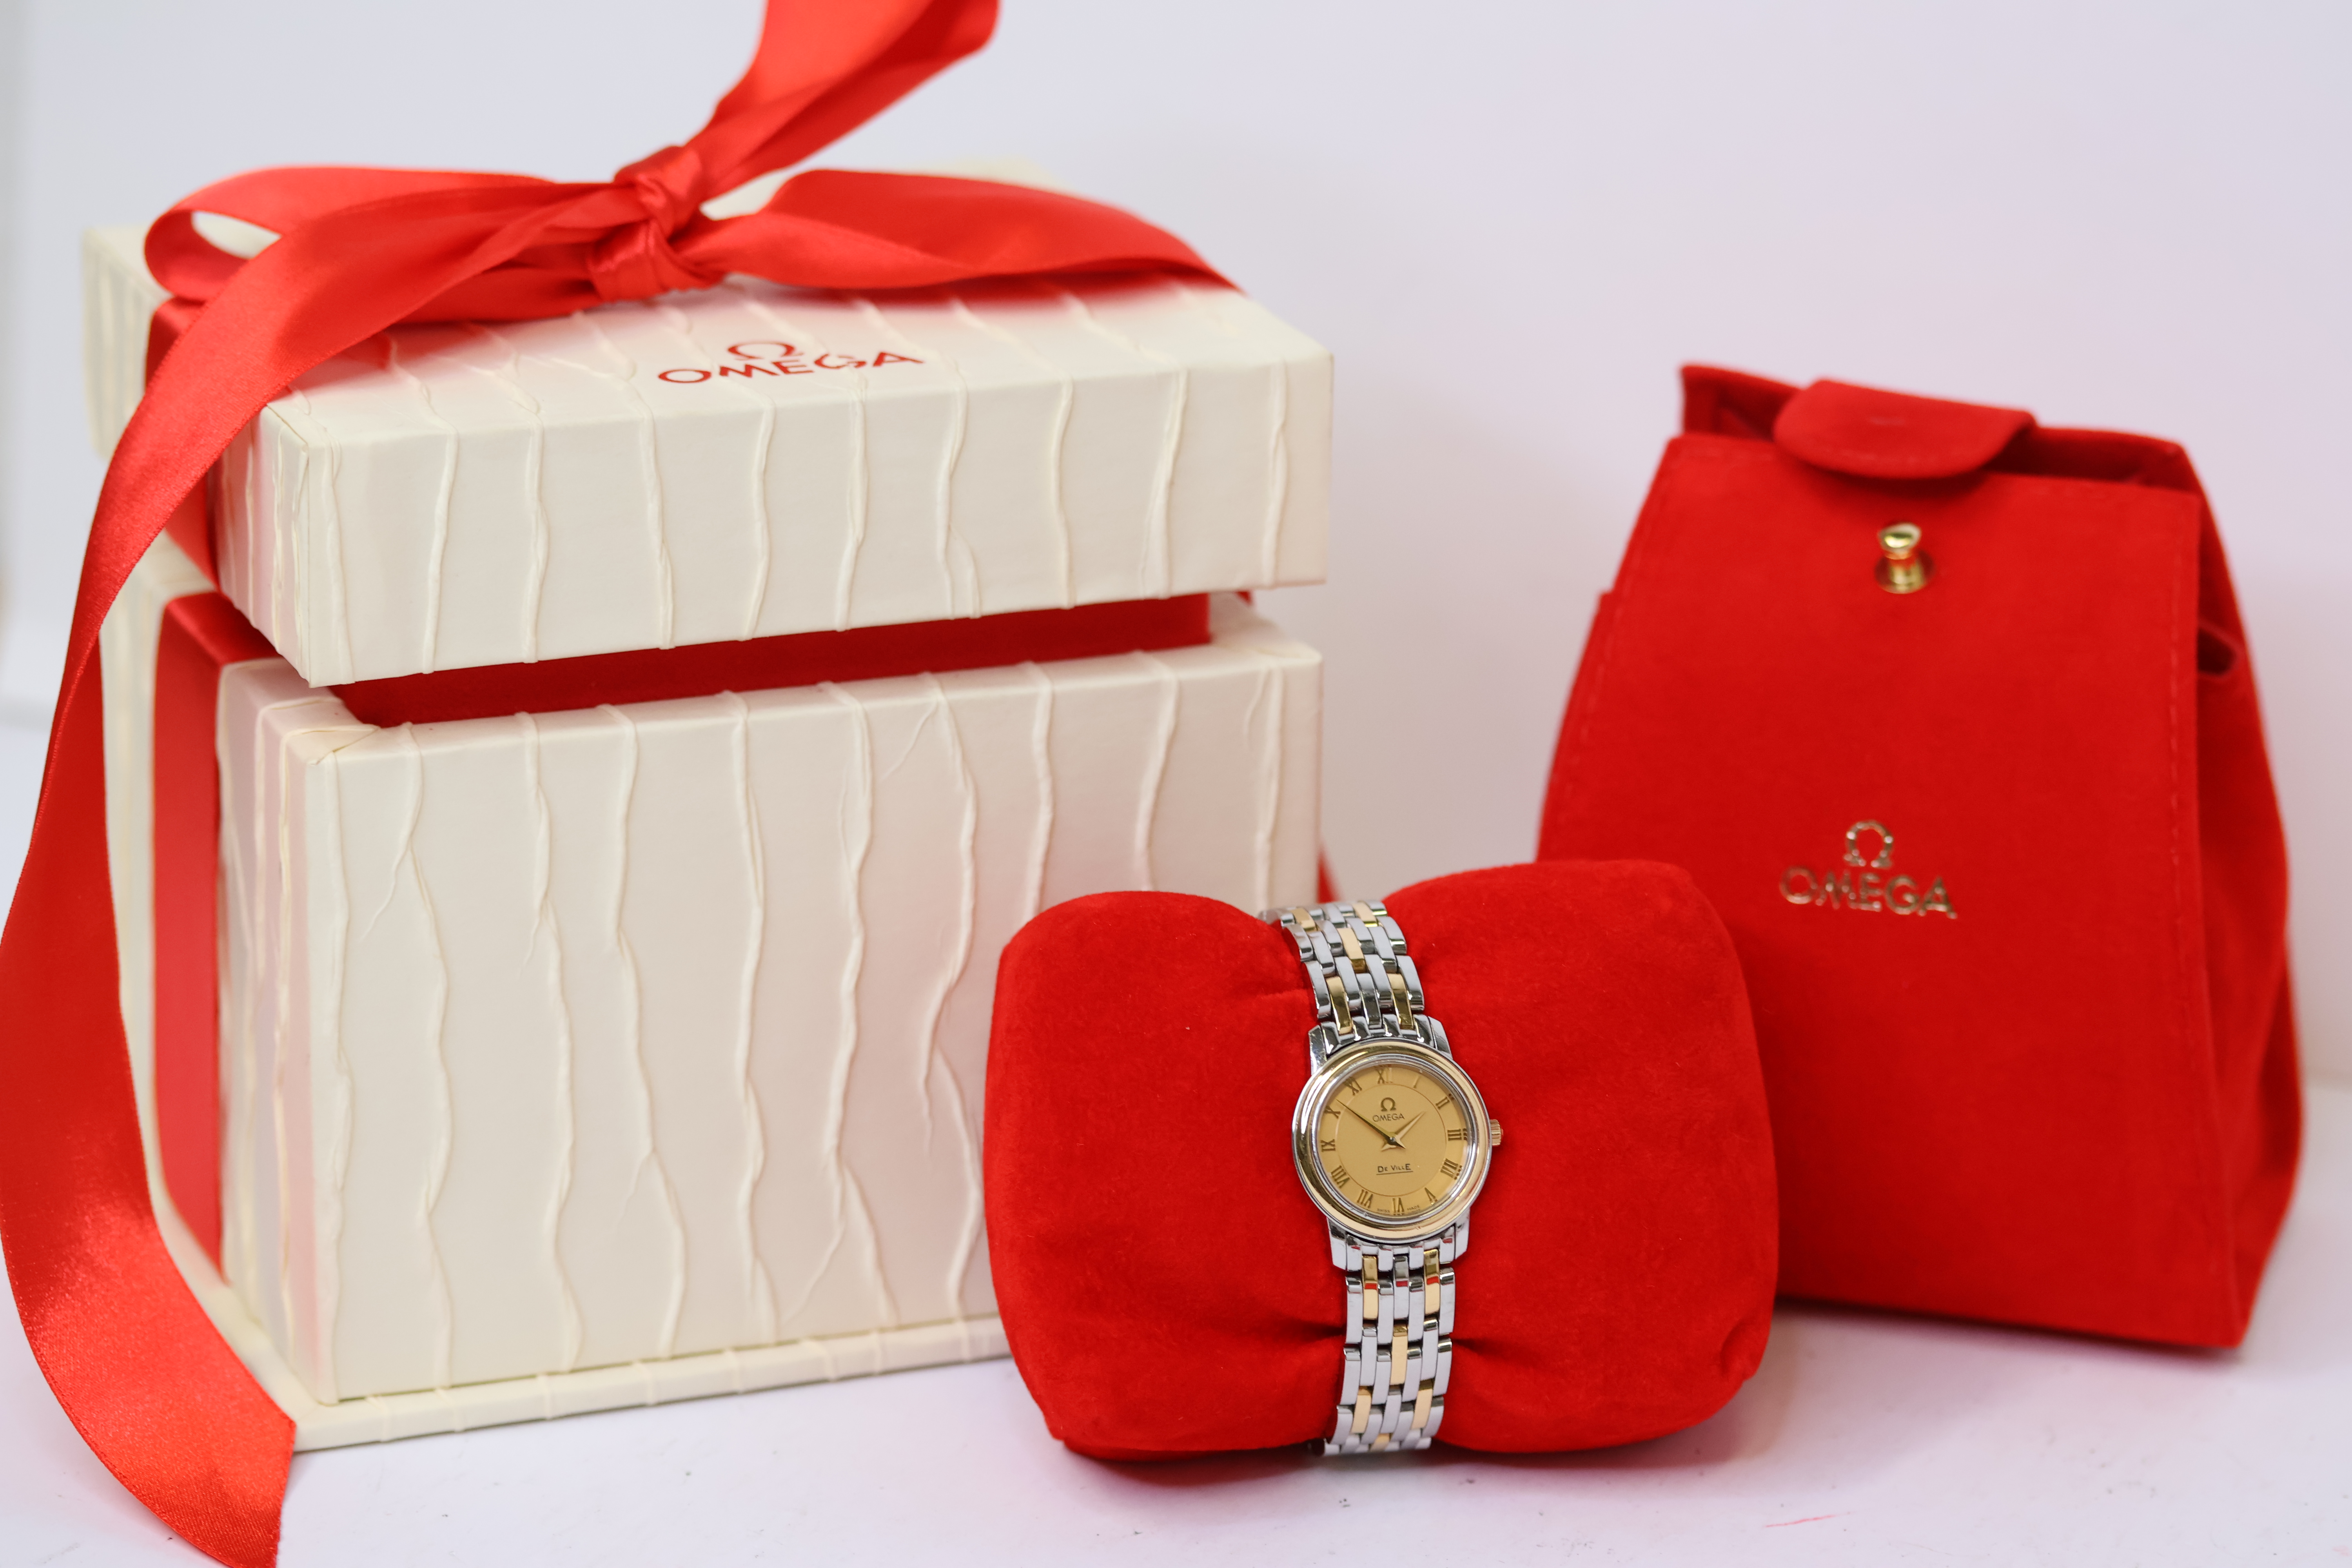 LADIES OMEGA DE VILLE PRESTIGE REFERENCE 43701200 CIRCA 2011 WITH BOX AND PAPERS - Image 3 of 9